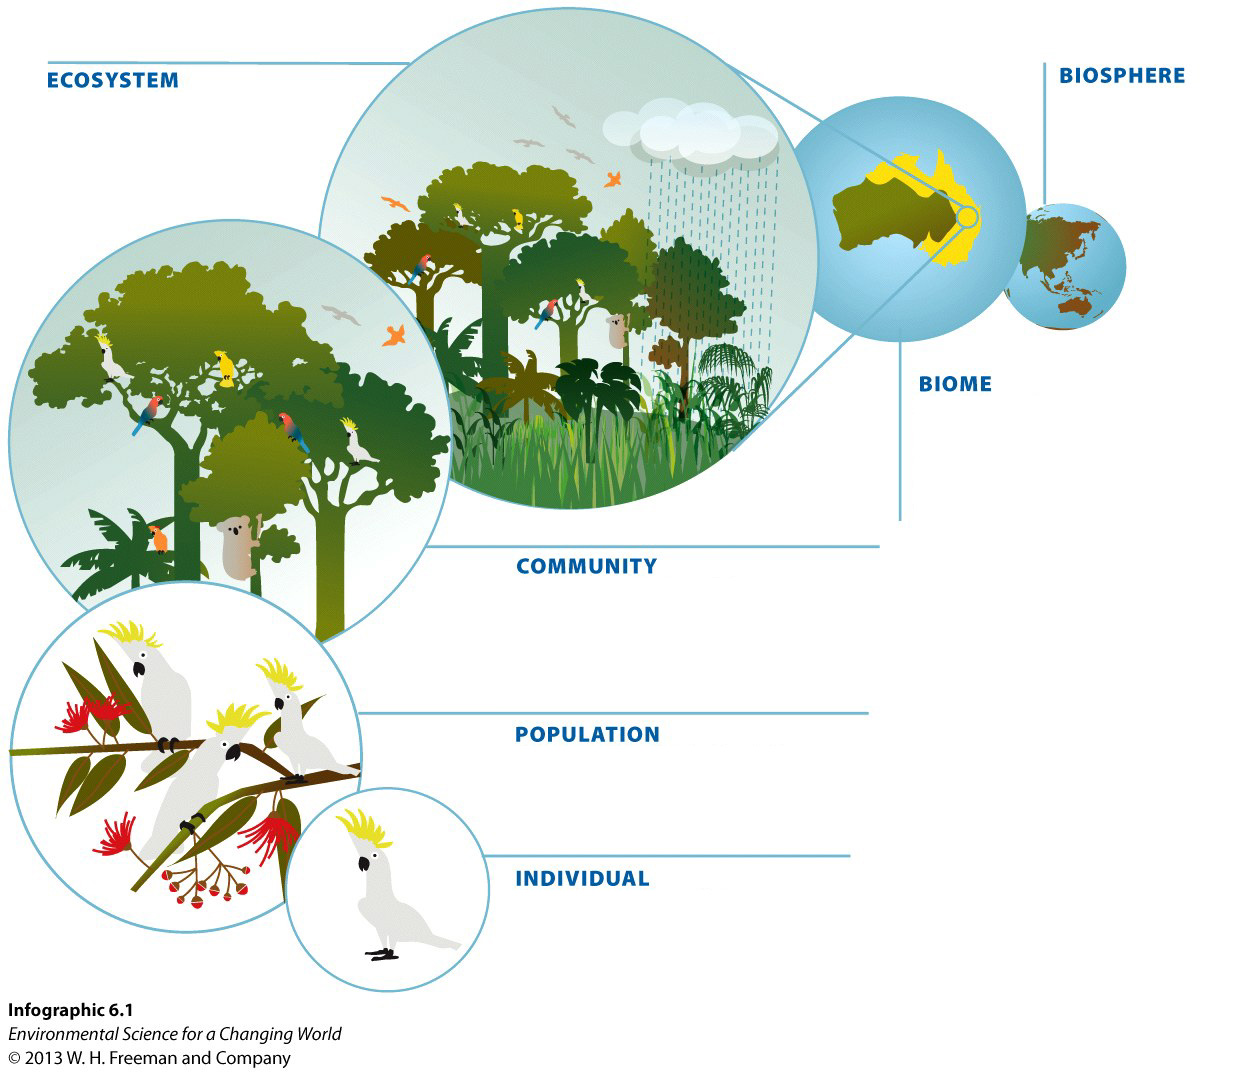 Infographic 6.1 Organization of Life: From Biosphere to Individual